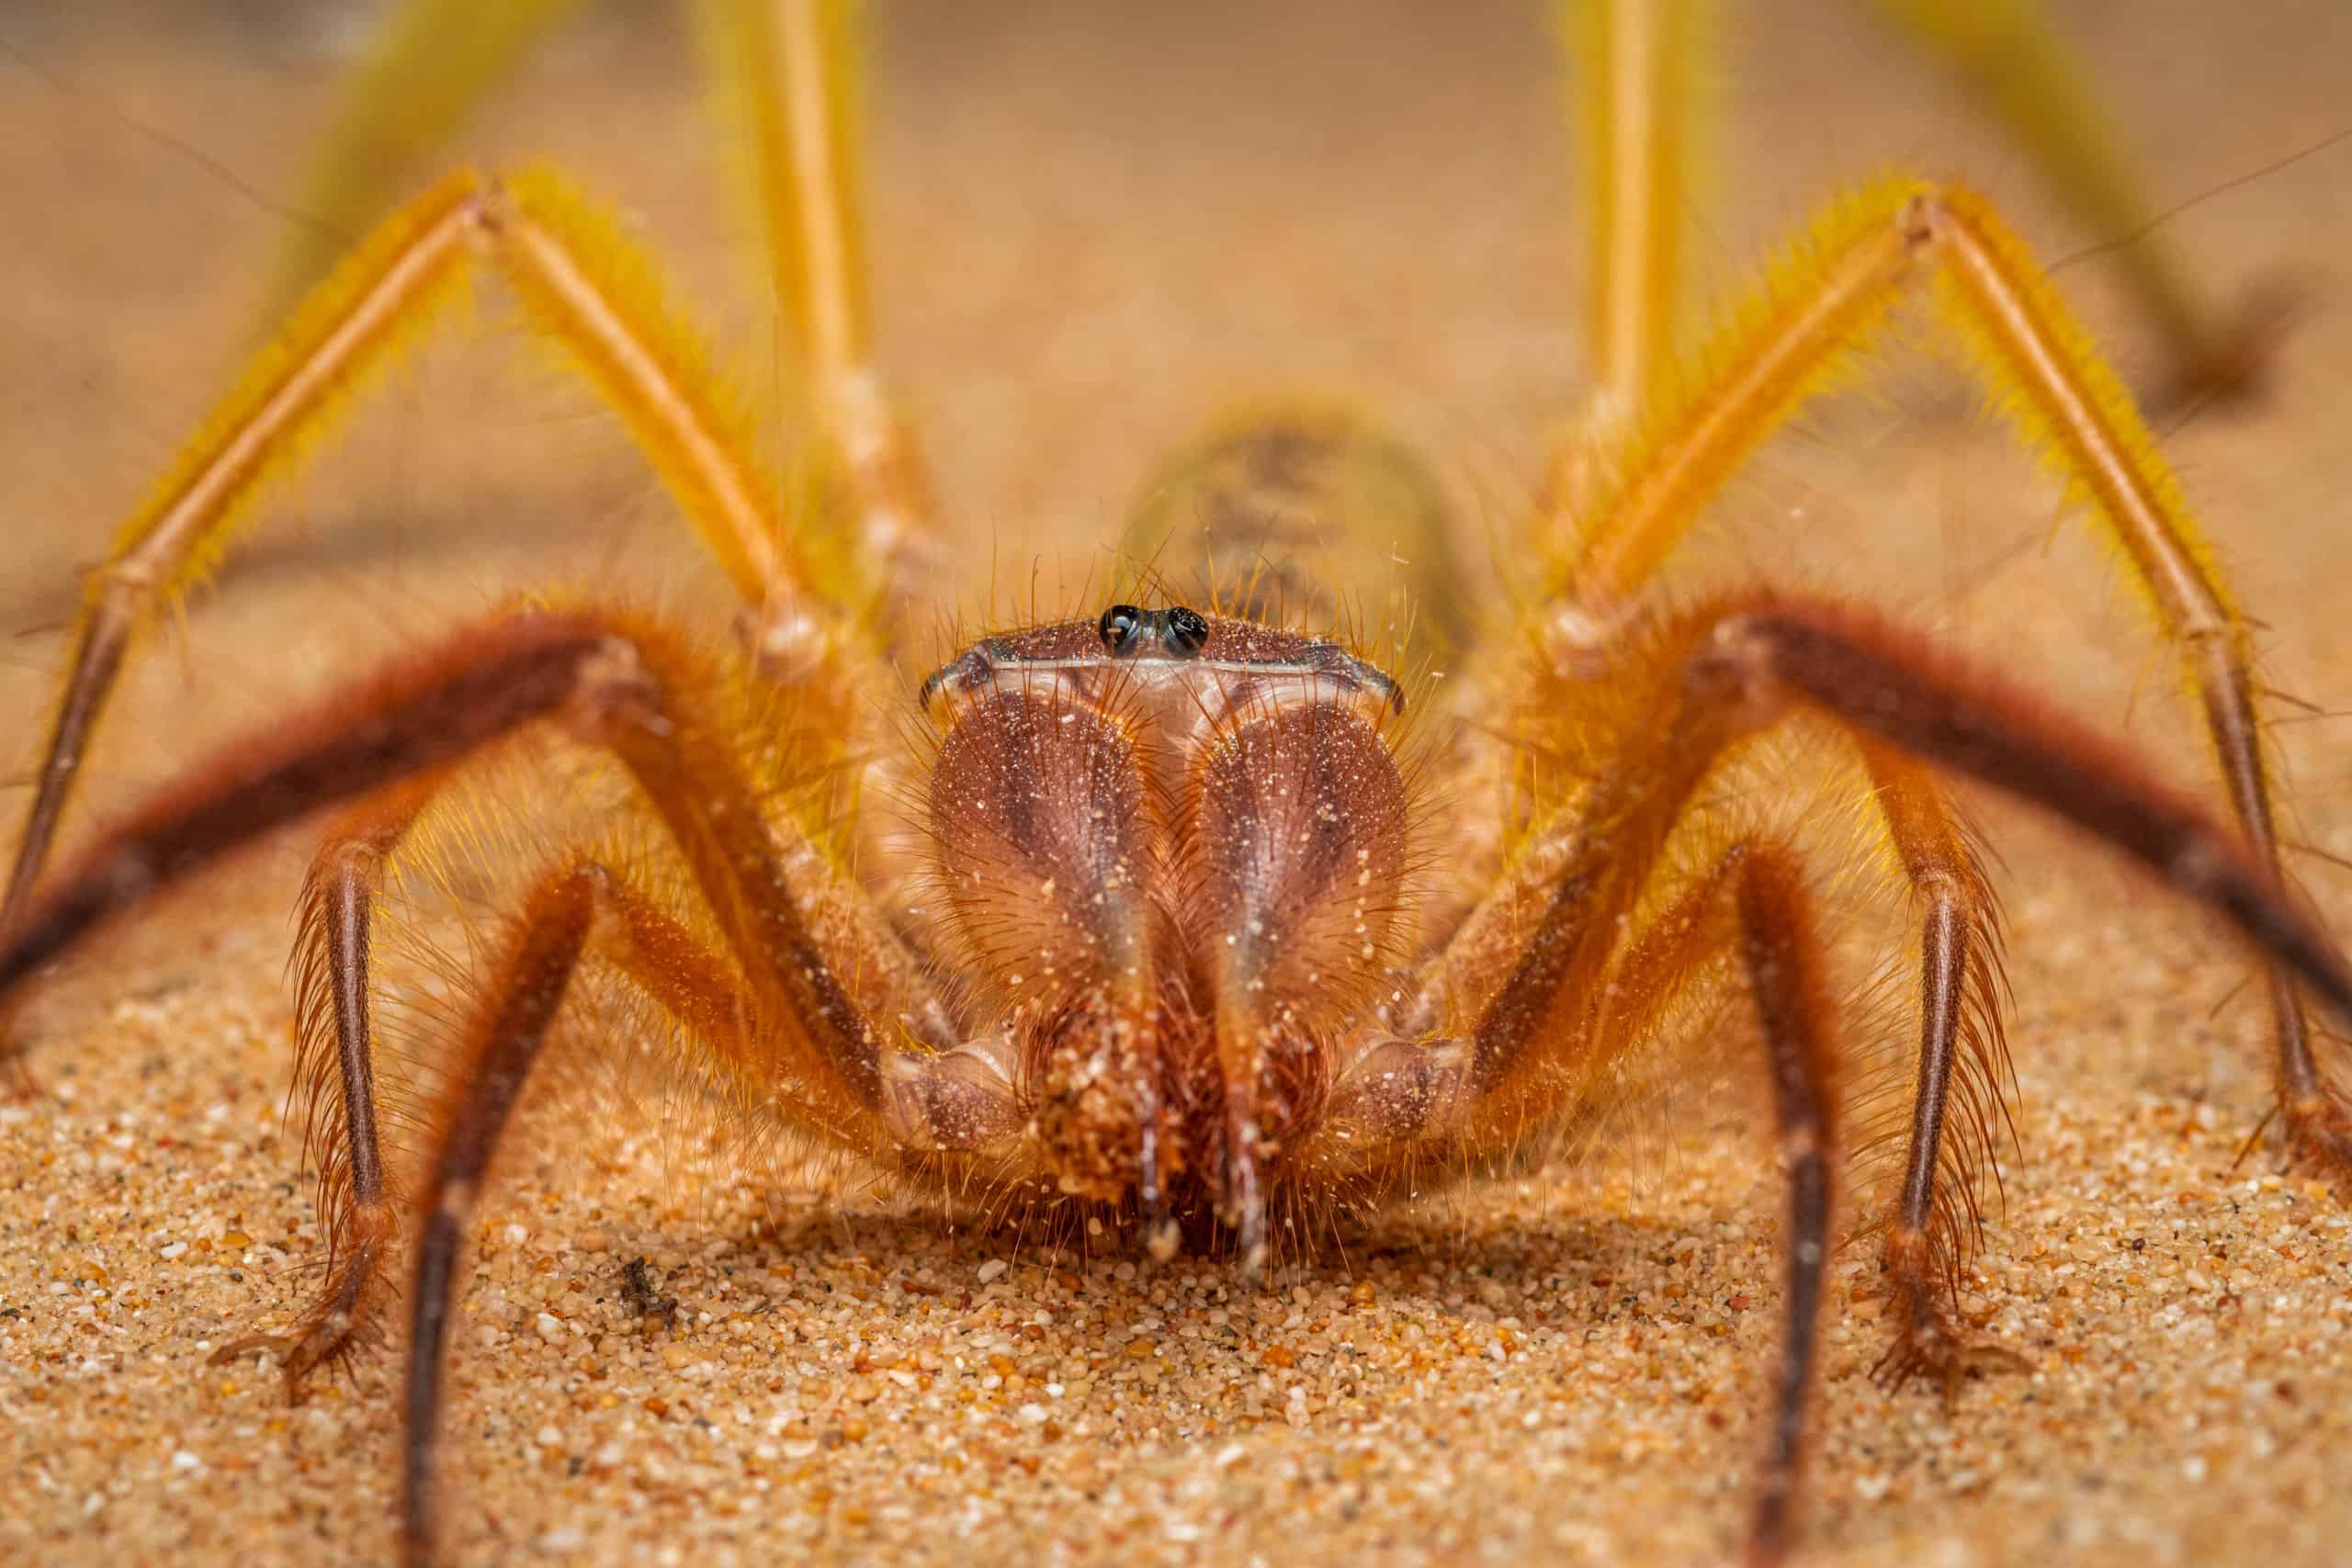 Camel spiders are not recommended as pets